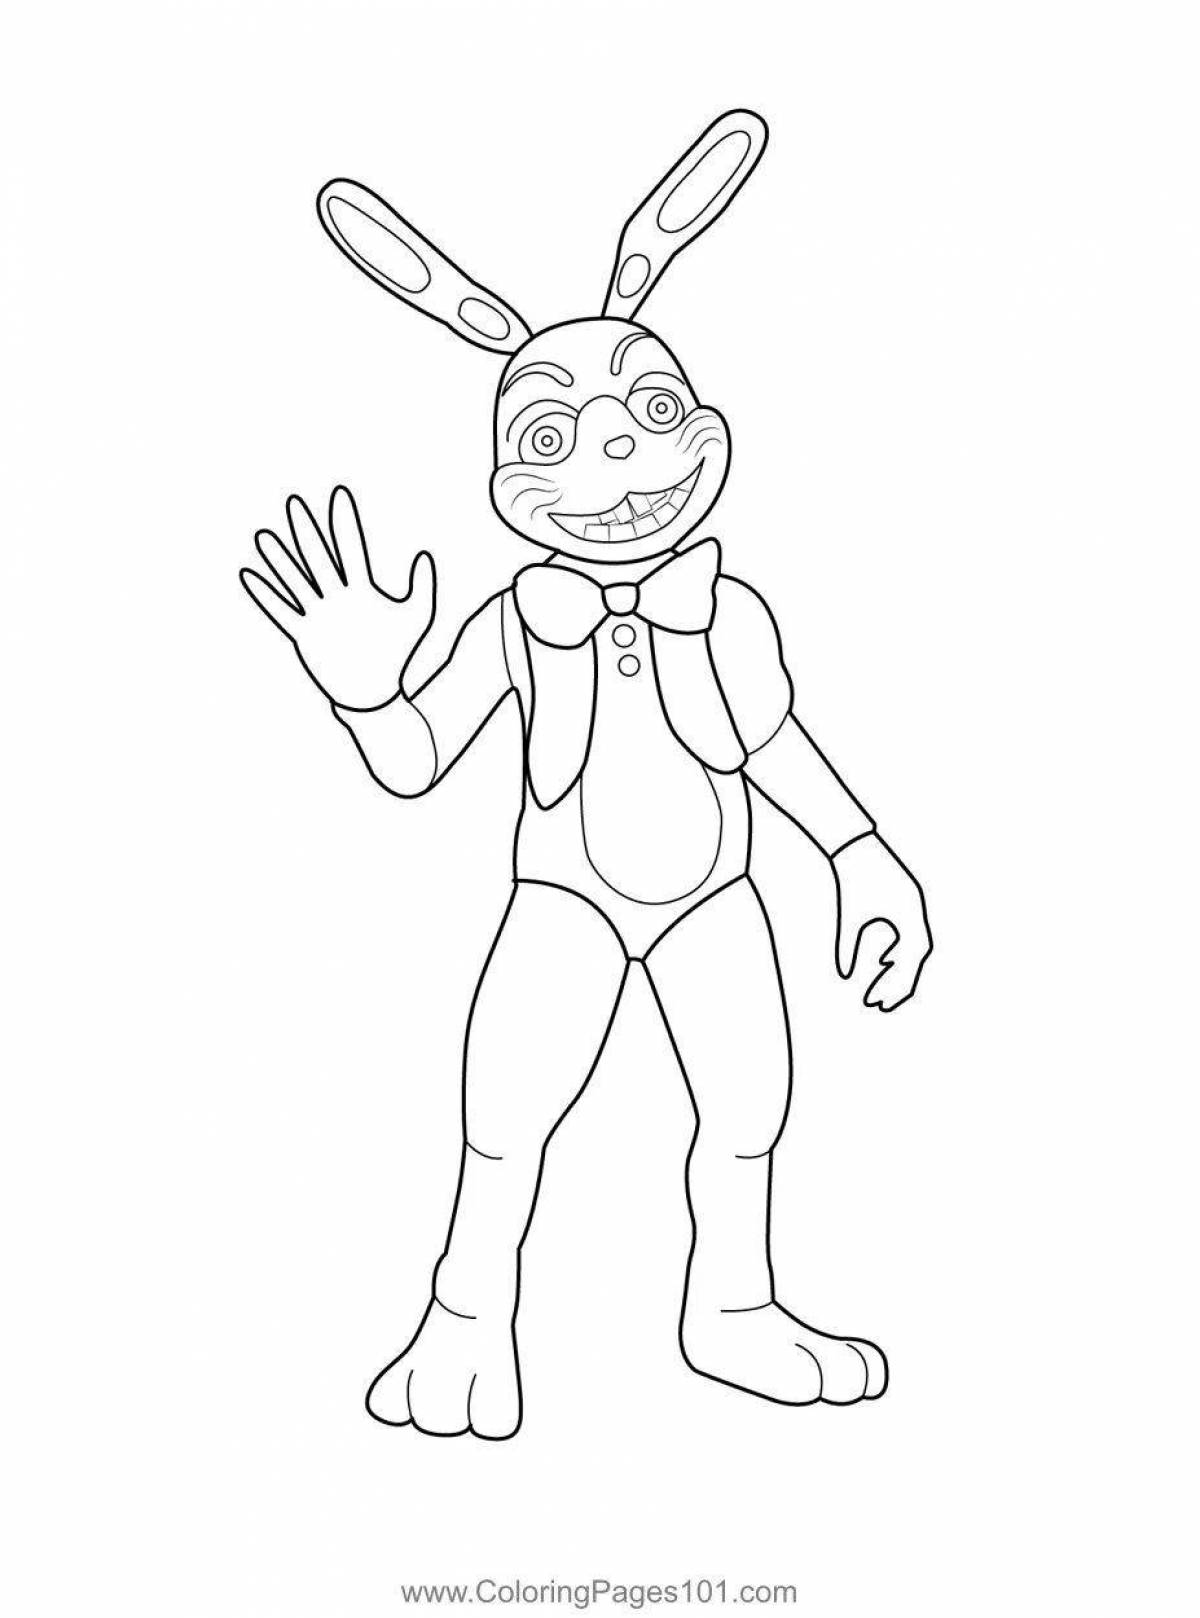 Adorable Five Nights at Freddy's Coloring Page